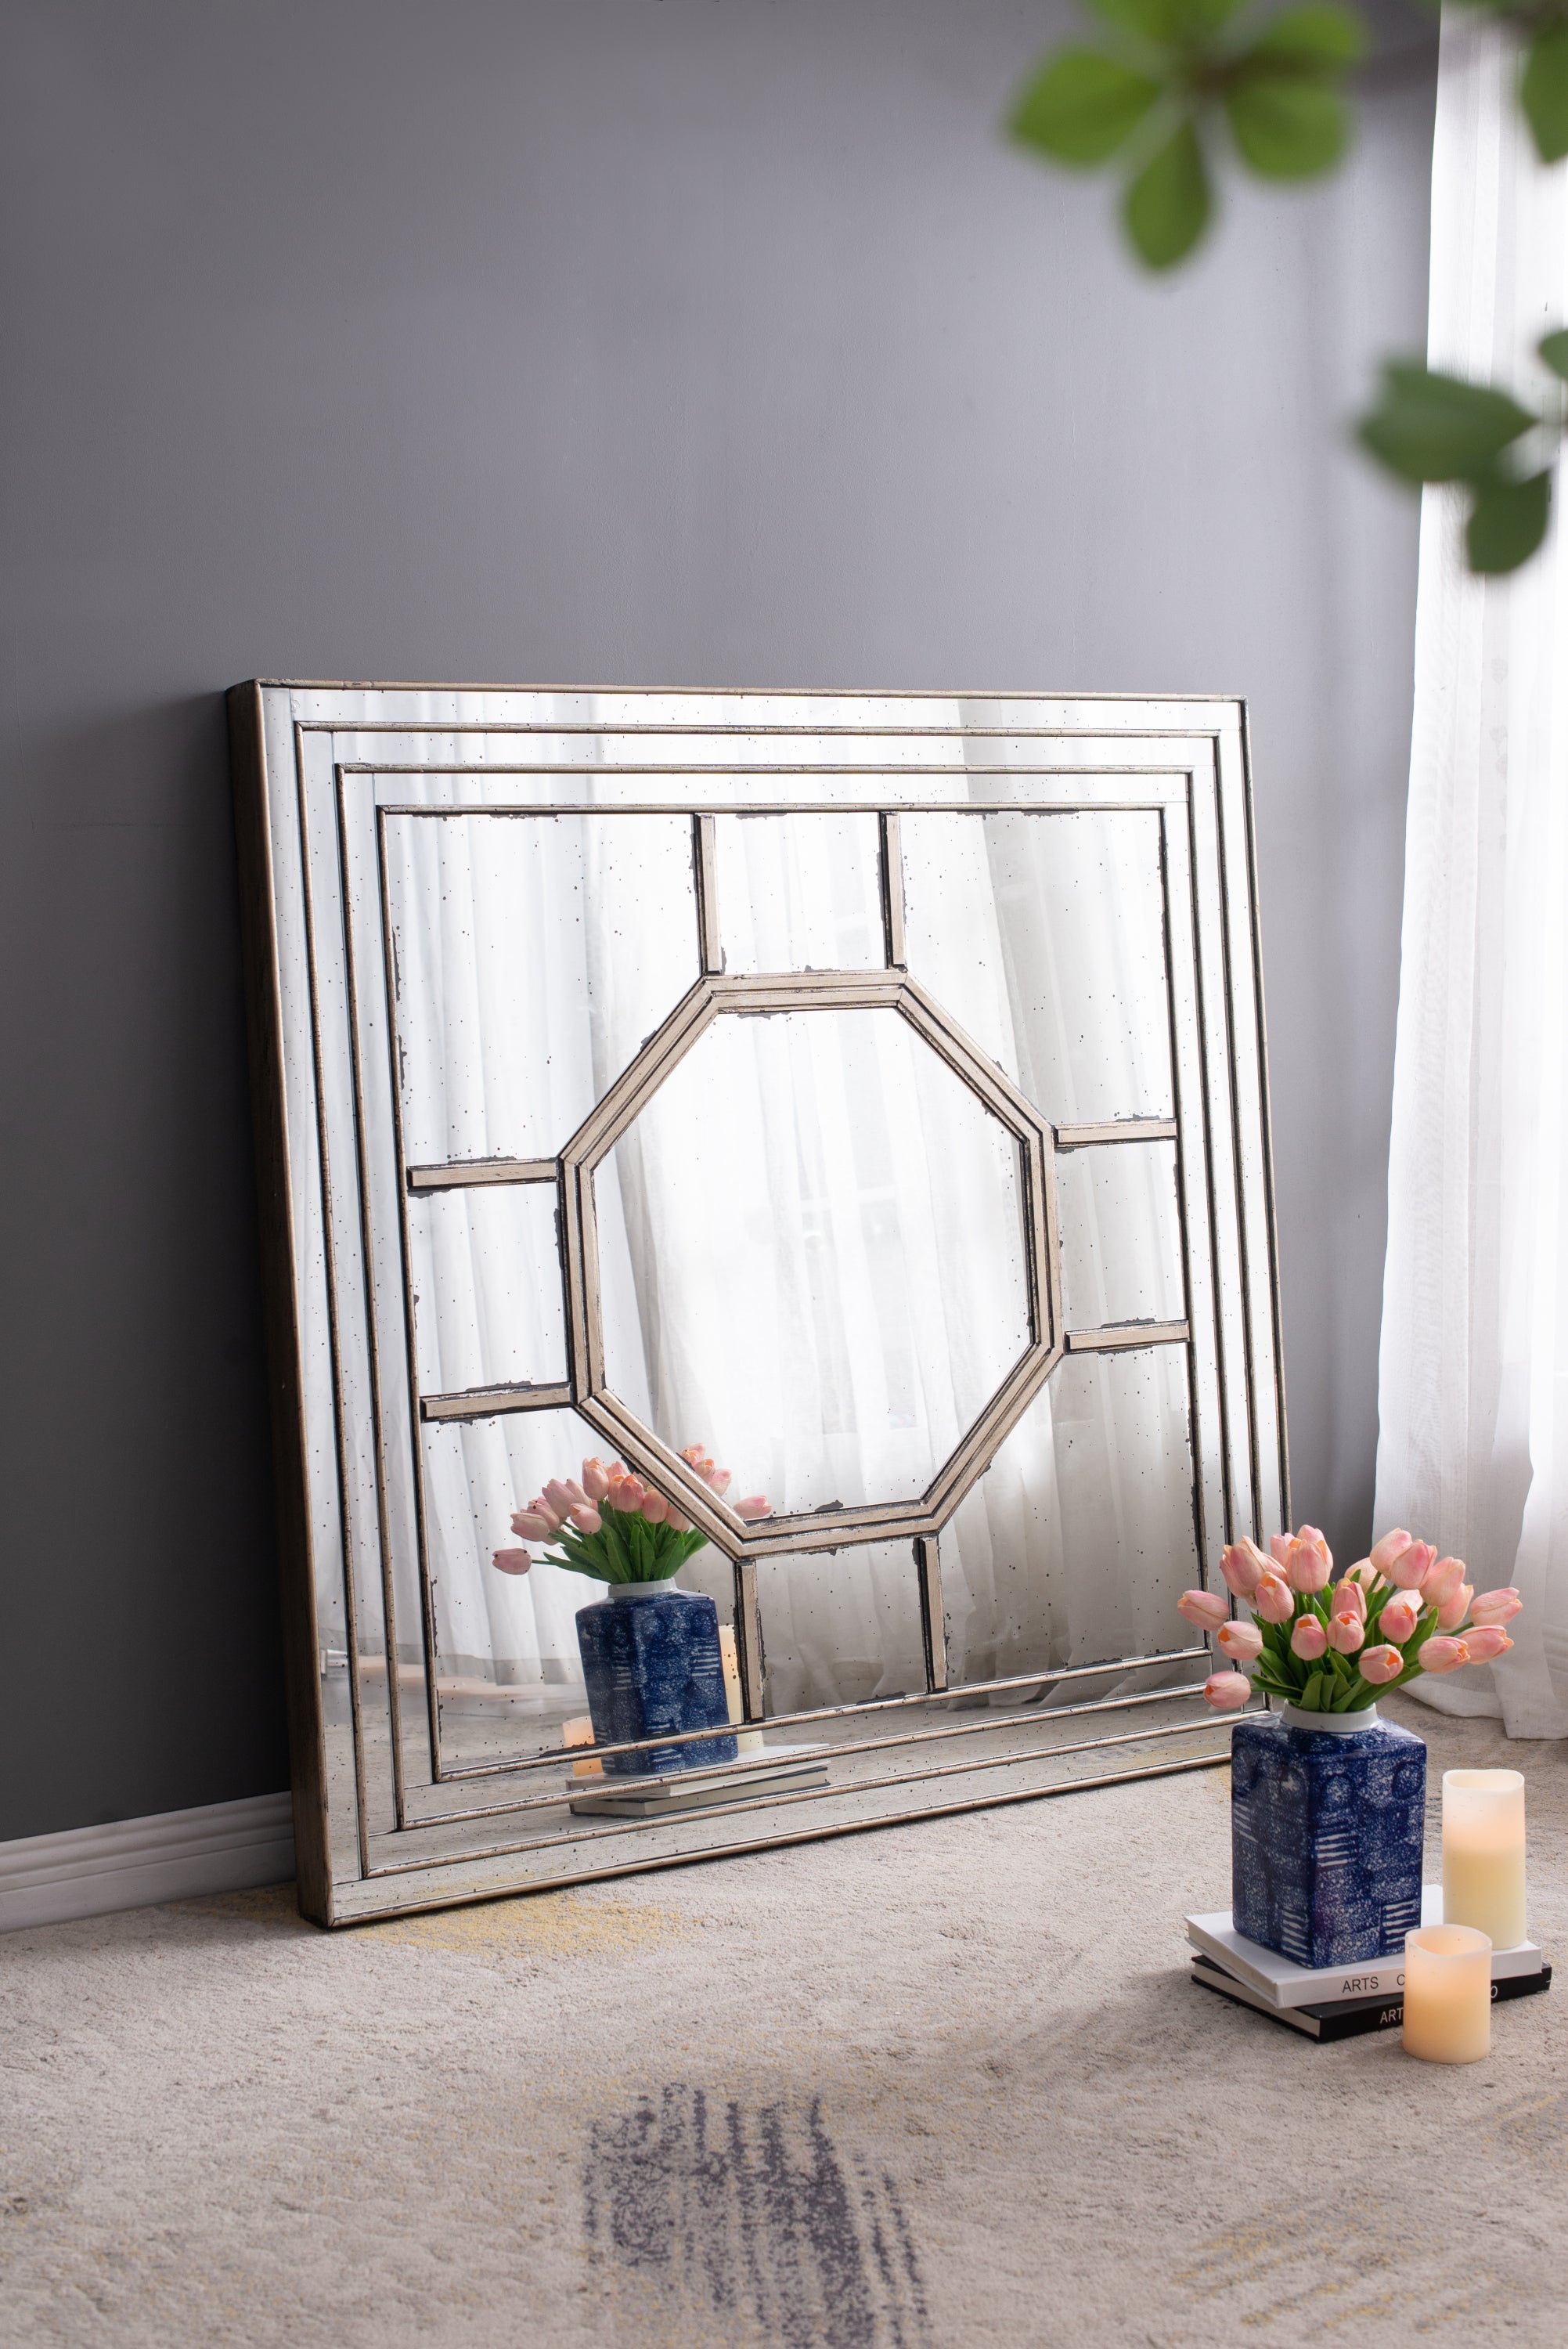 48"x48" Antique Style Decorative Square Wall Mirror with Mirrored Frame